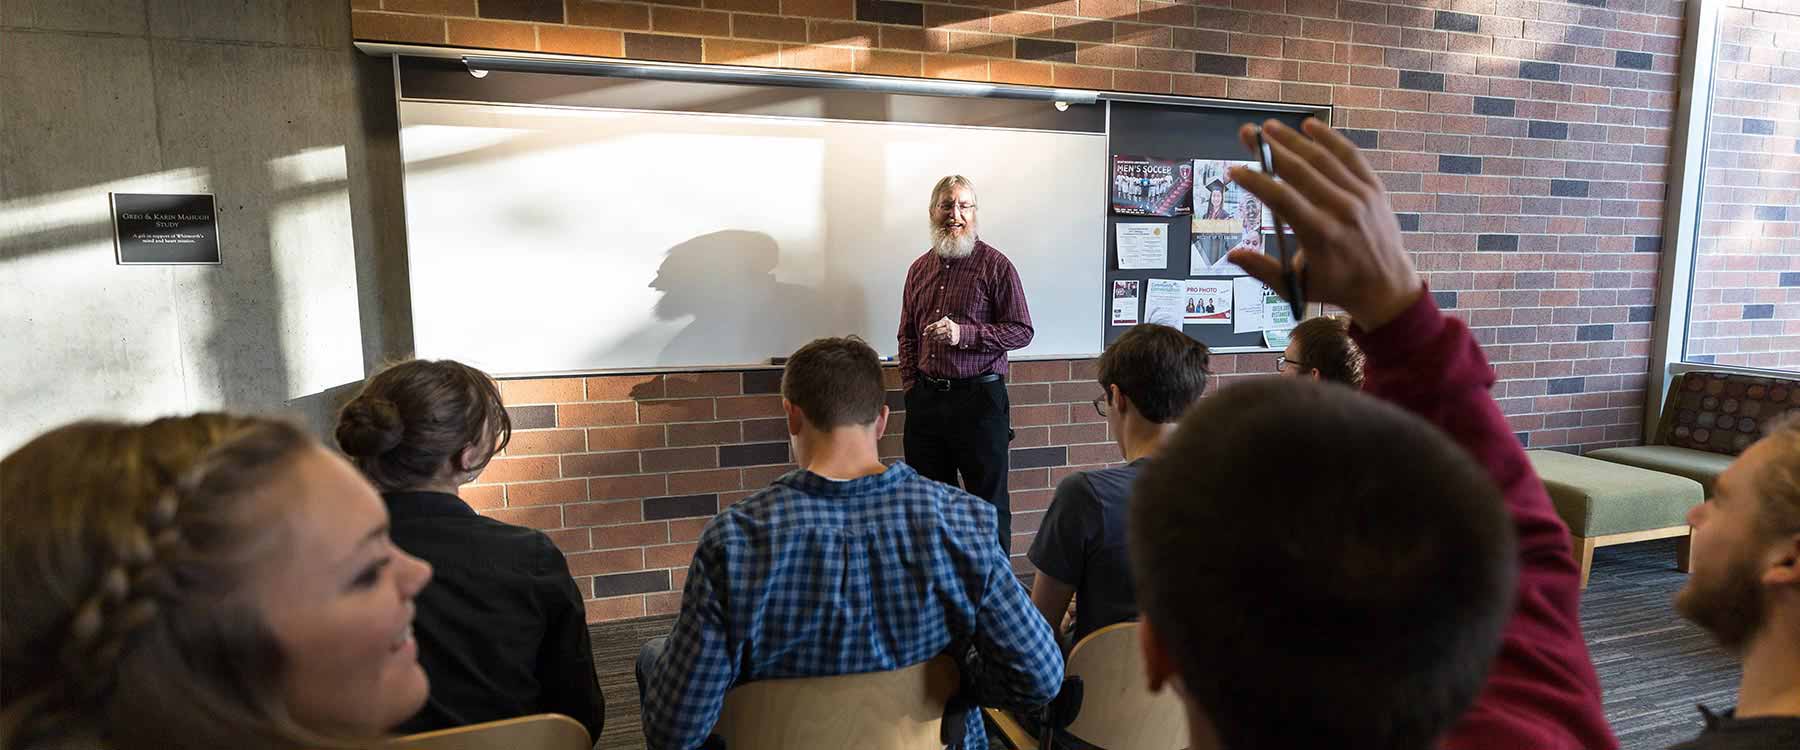 A student raises his hand in an engineering classroom